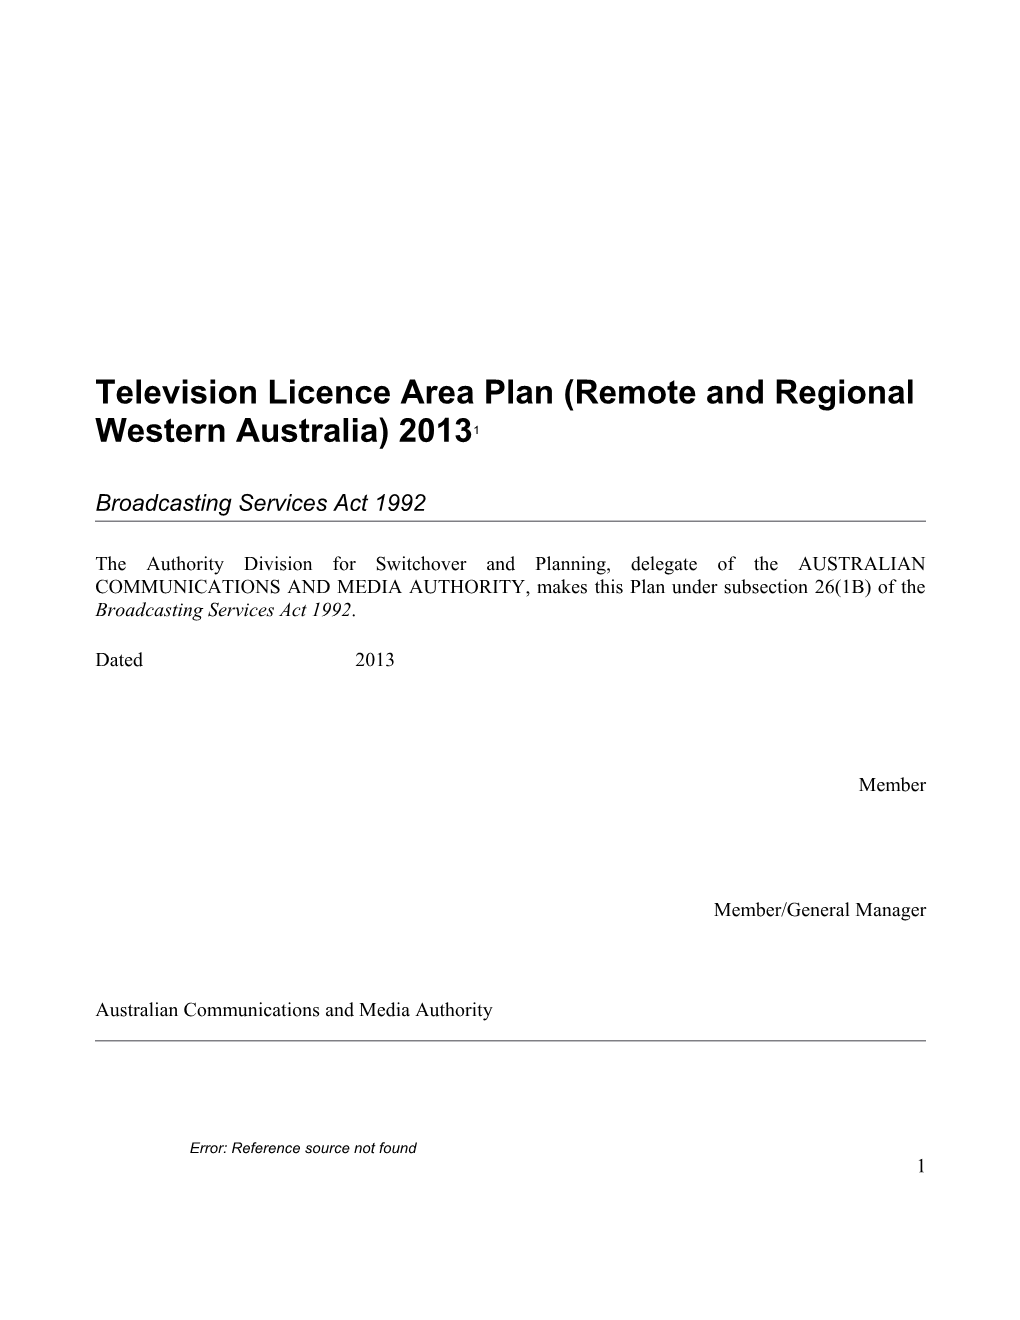 Television Licence Area Plan (Remote and Regional Western Australia) 2013